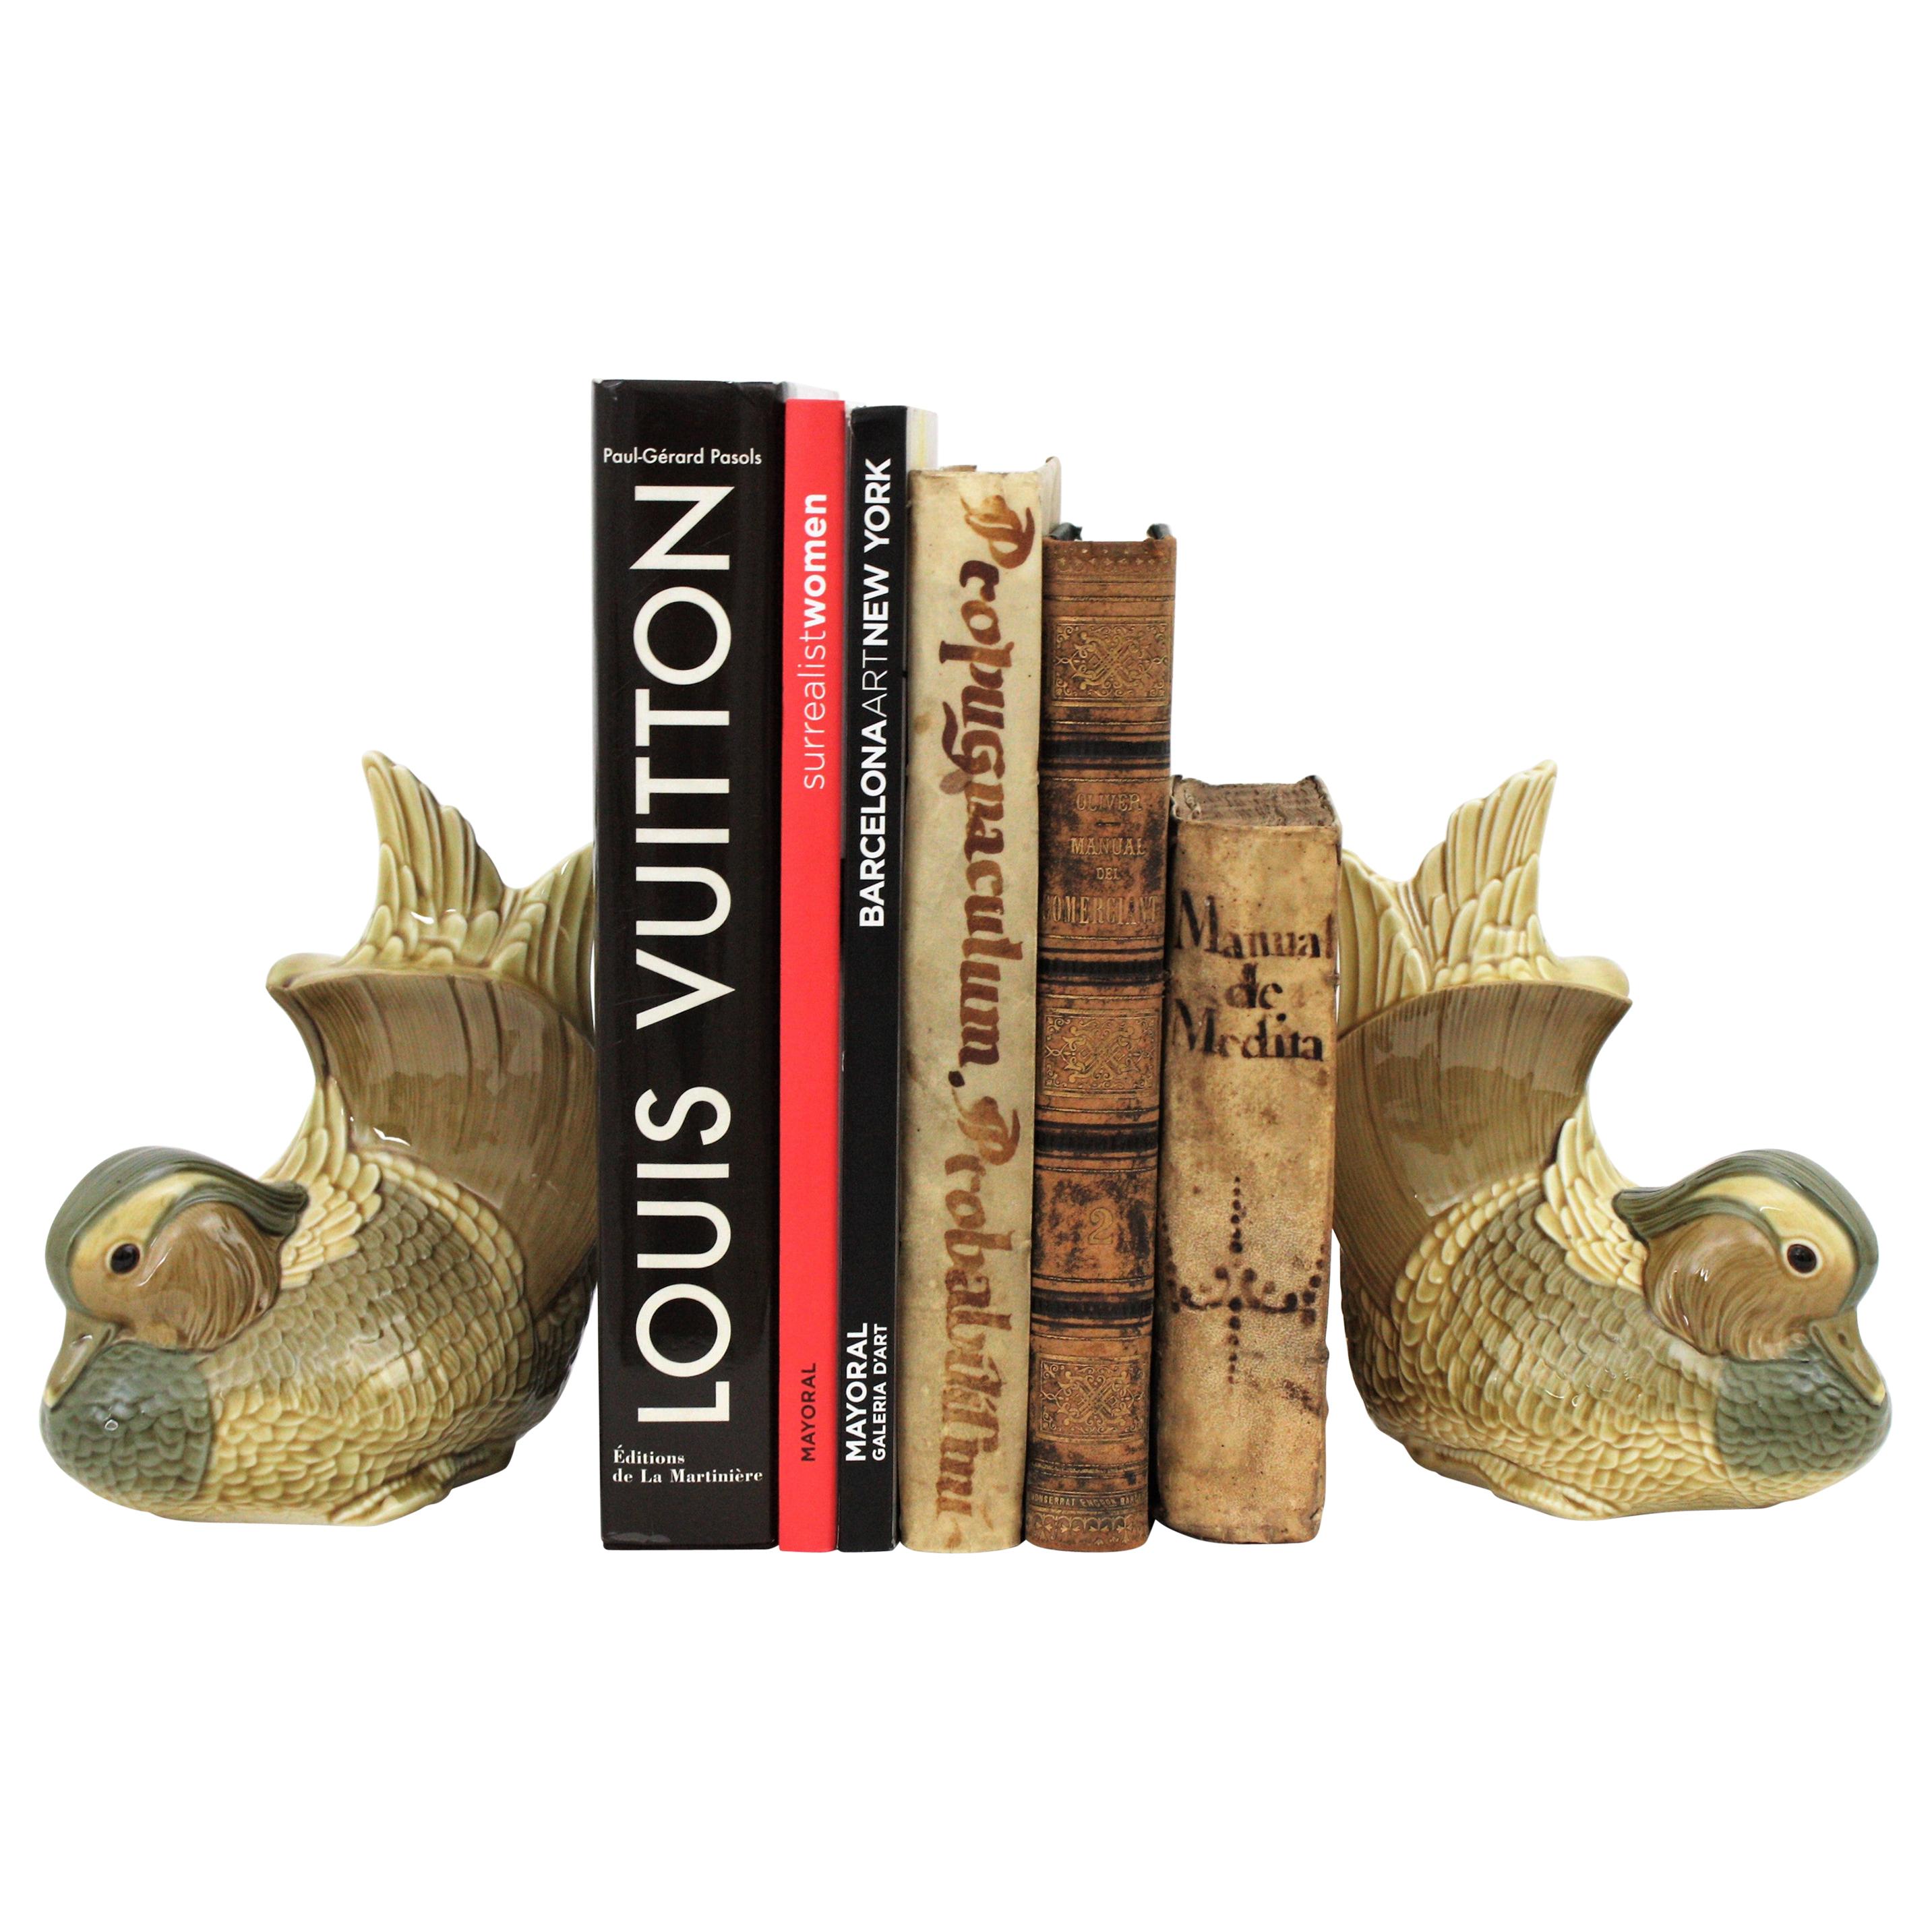 ducky bookends